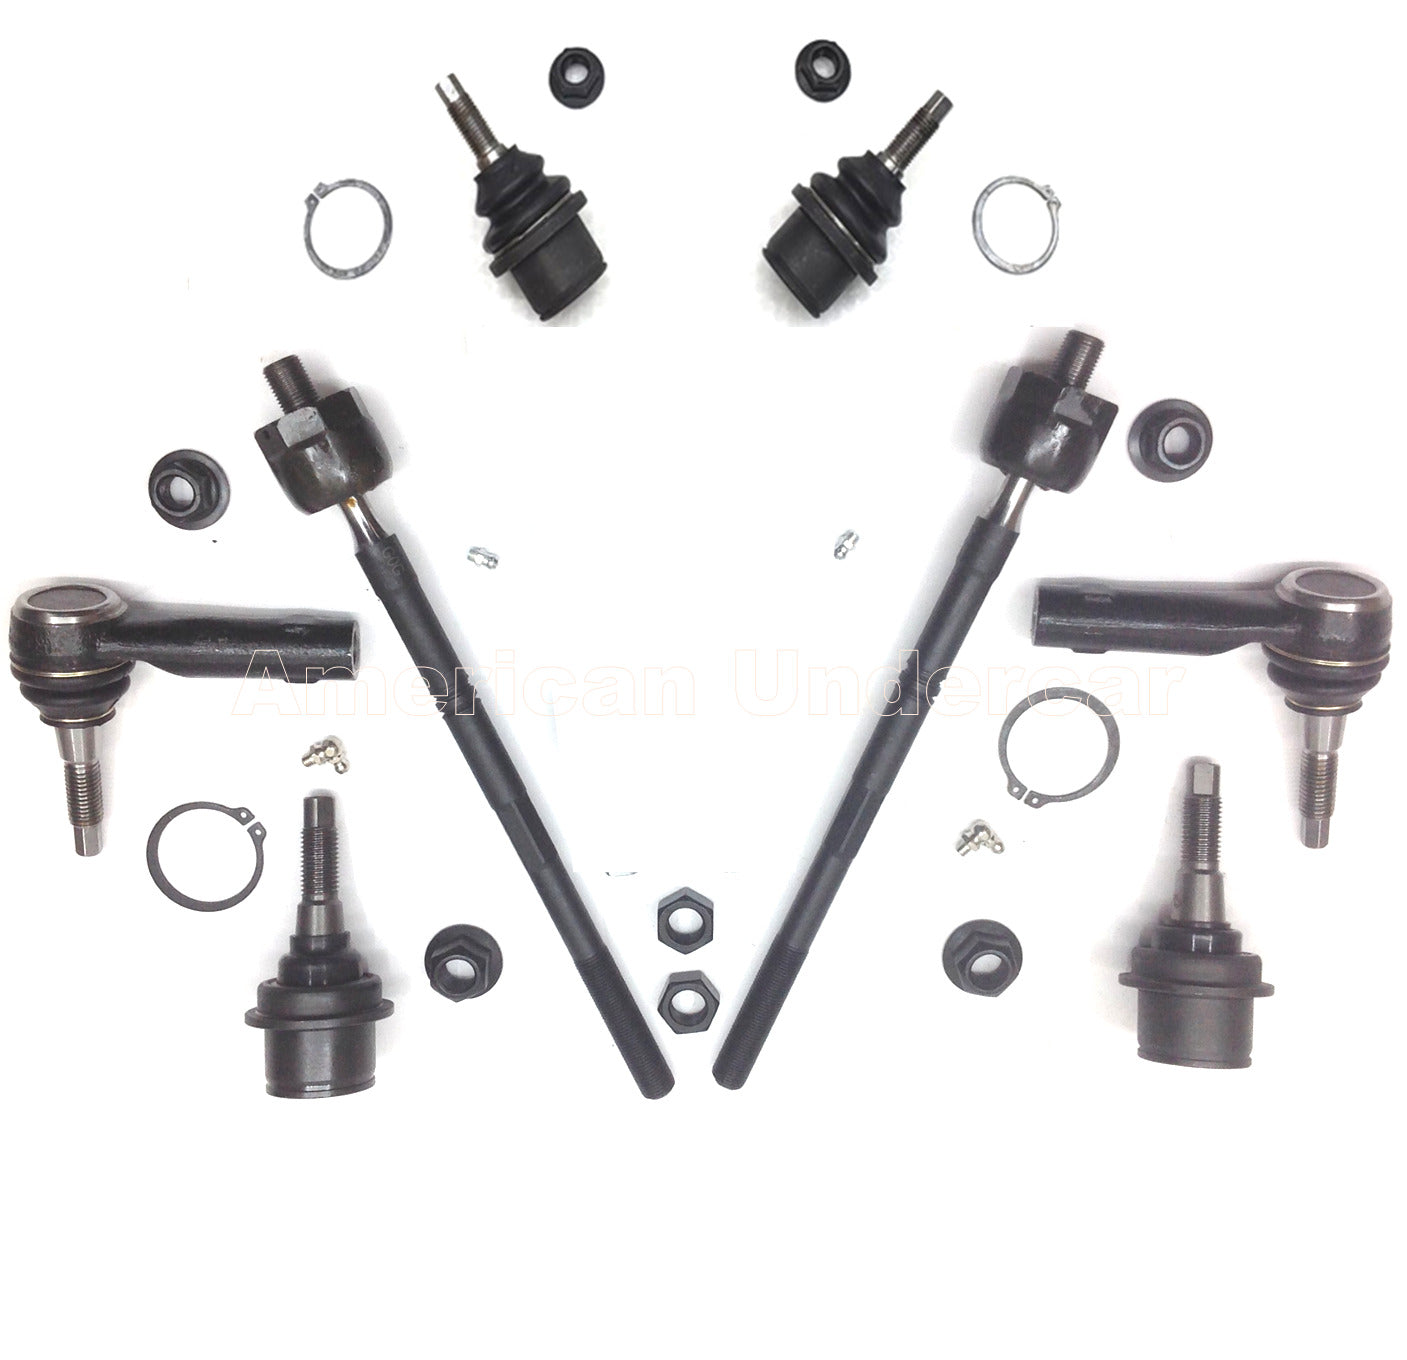 Lifetime Ball Joints Tie Rod Steering Suspension Kit for 2015-2020 Ford F150 2WD